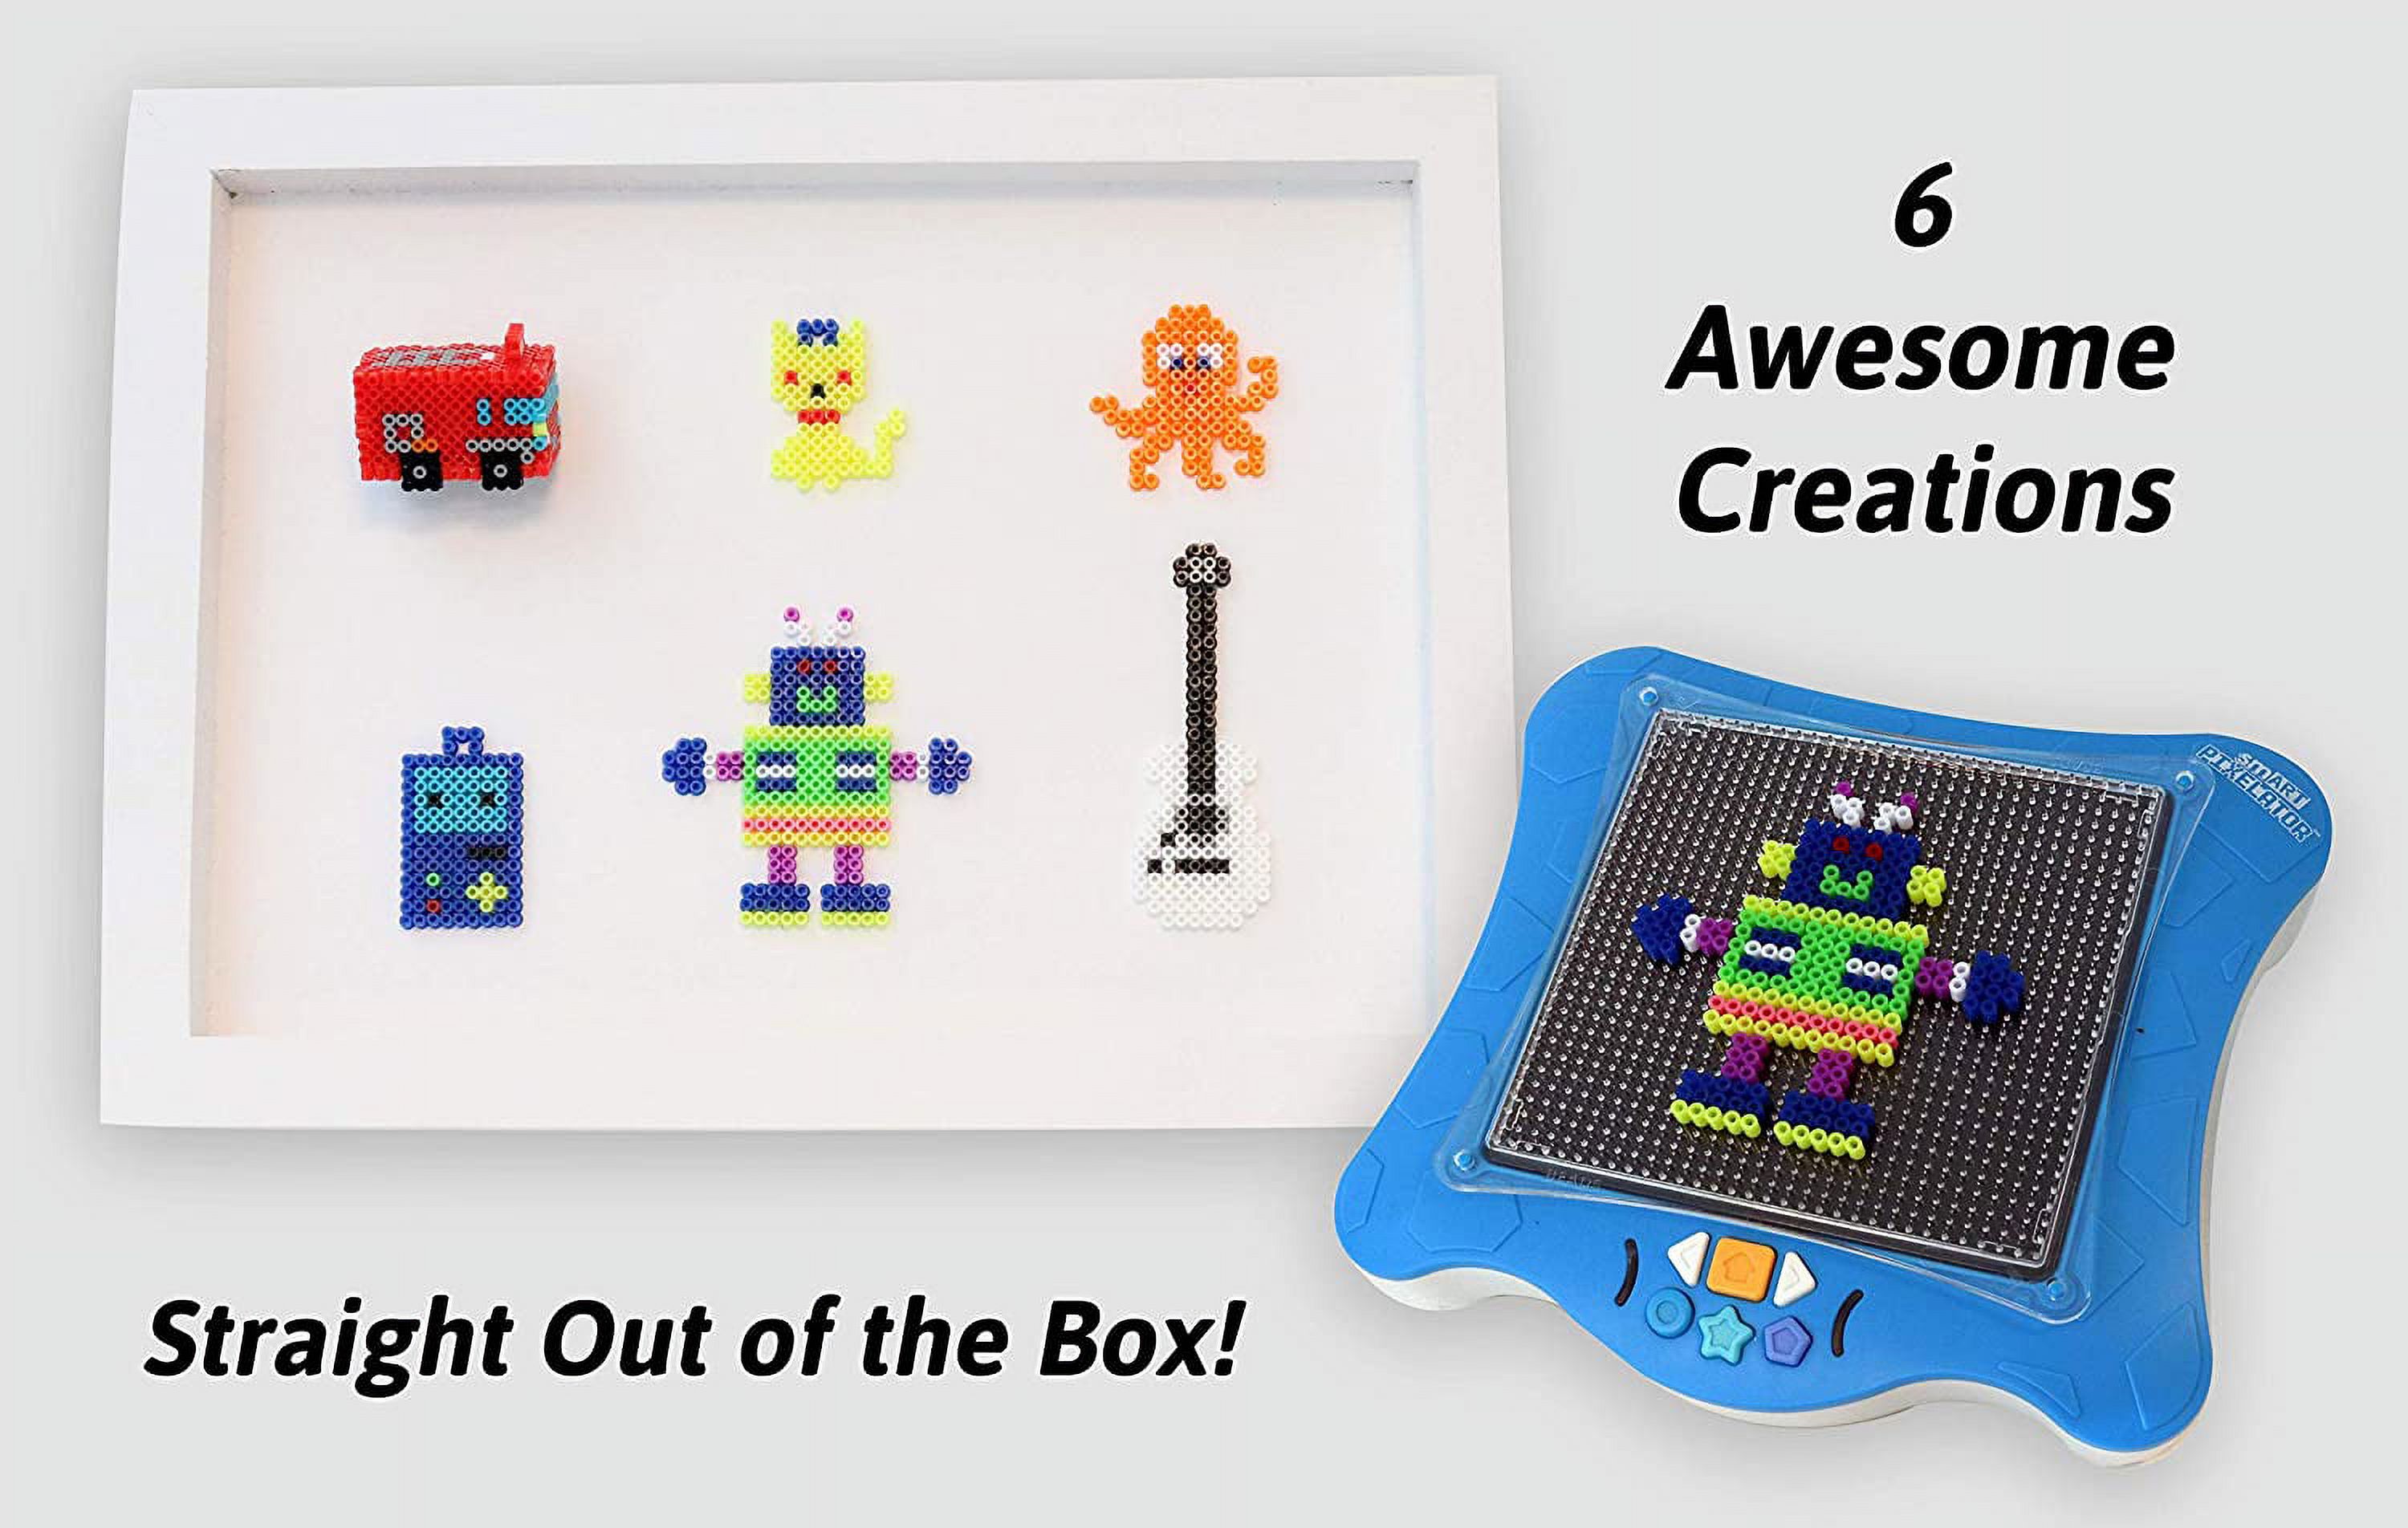 smART Pixelator: Create Your Own 3D Pixelated Art Projects, Gift for Kids, Ages 7+ - image 5 of 12